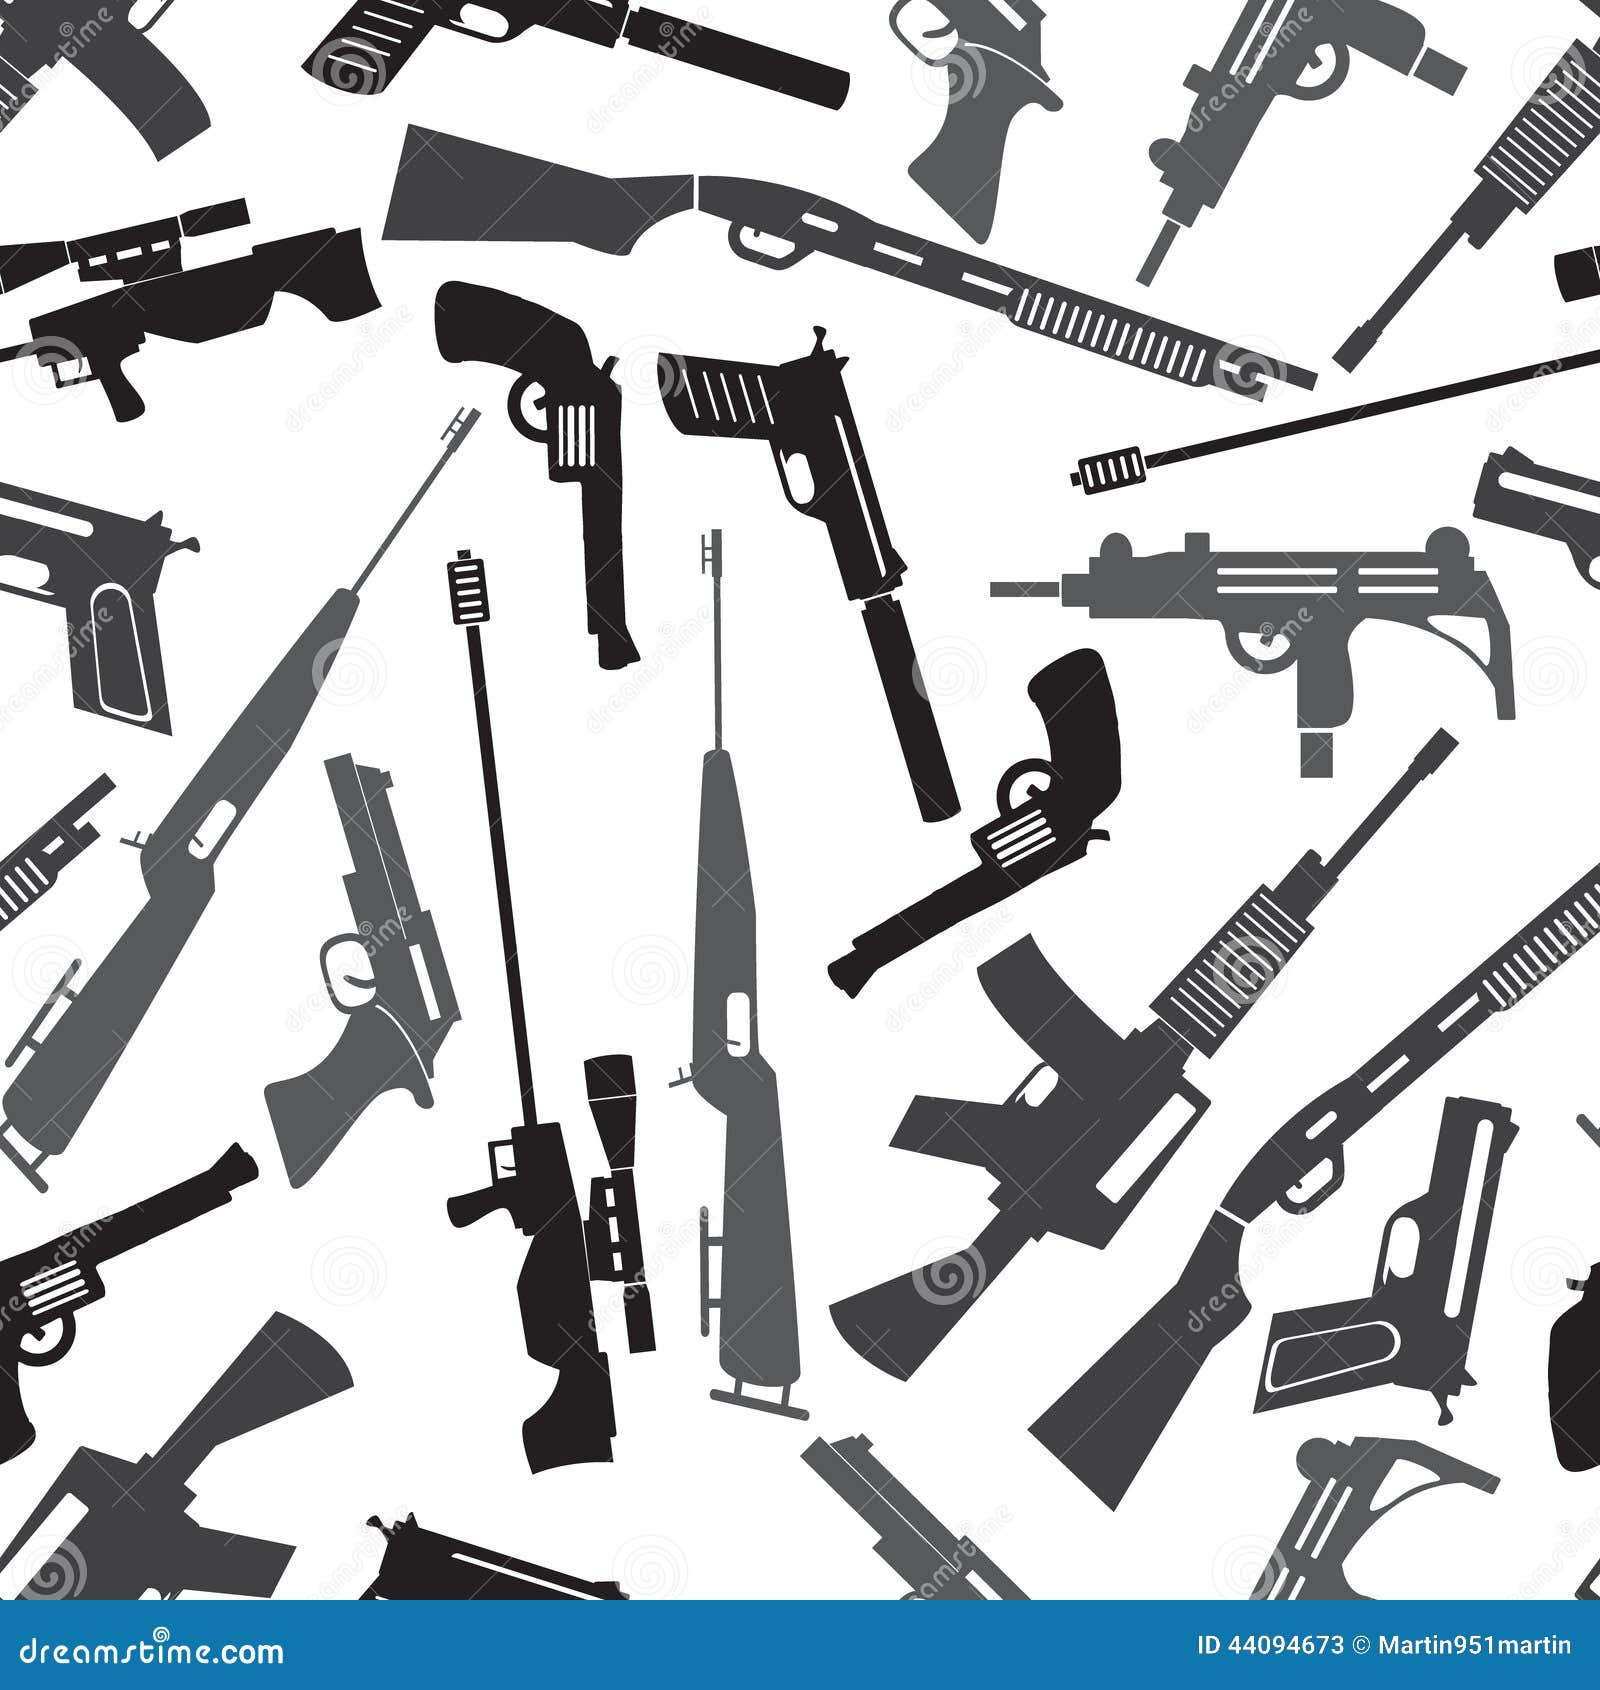 firearms weapons and guns seamless pattern